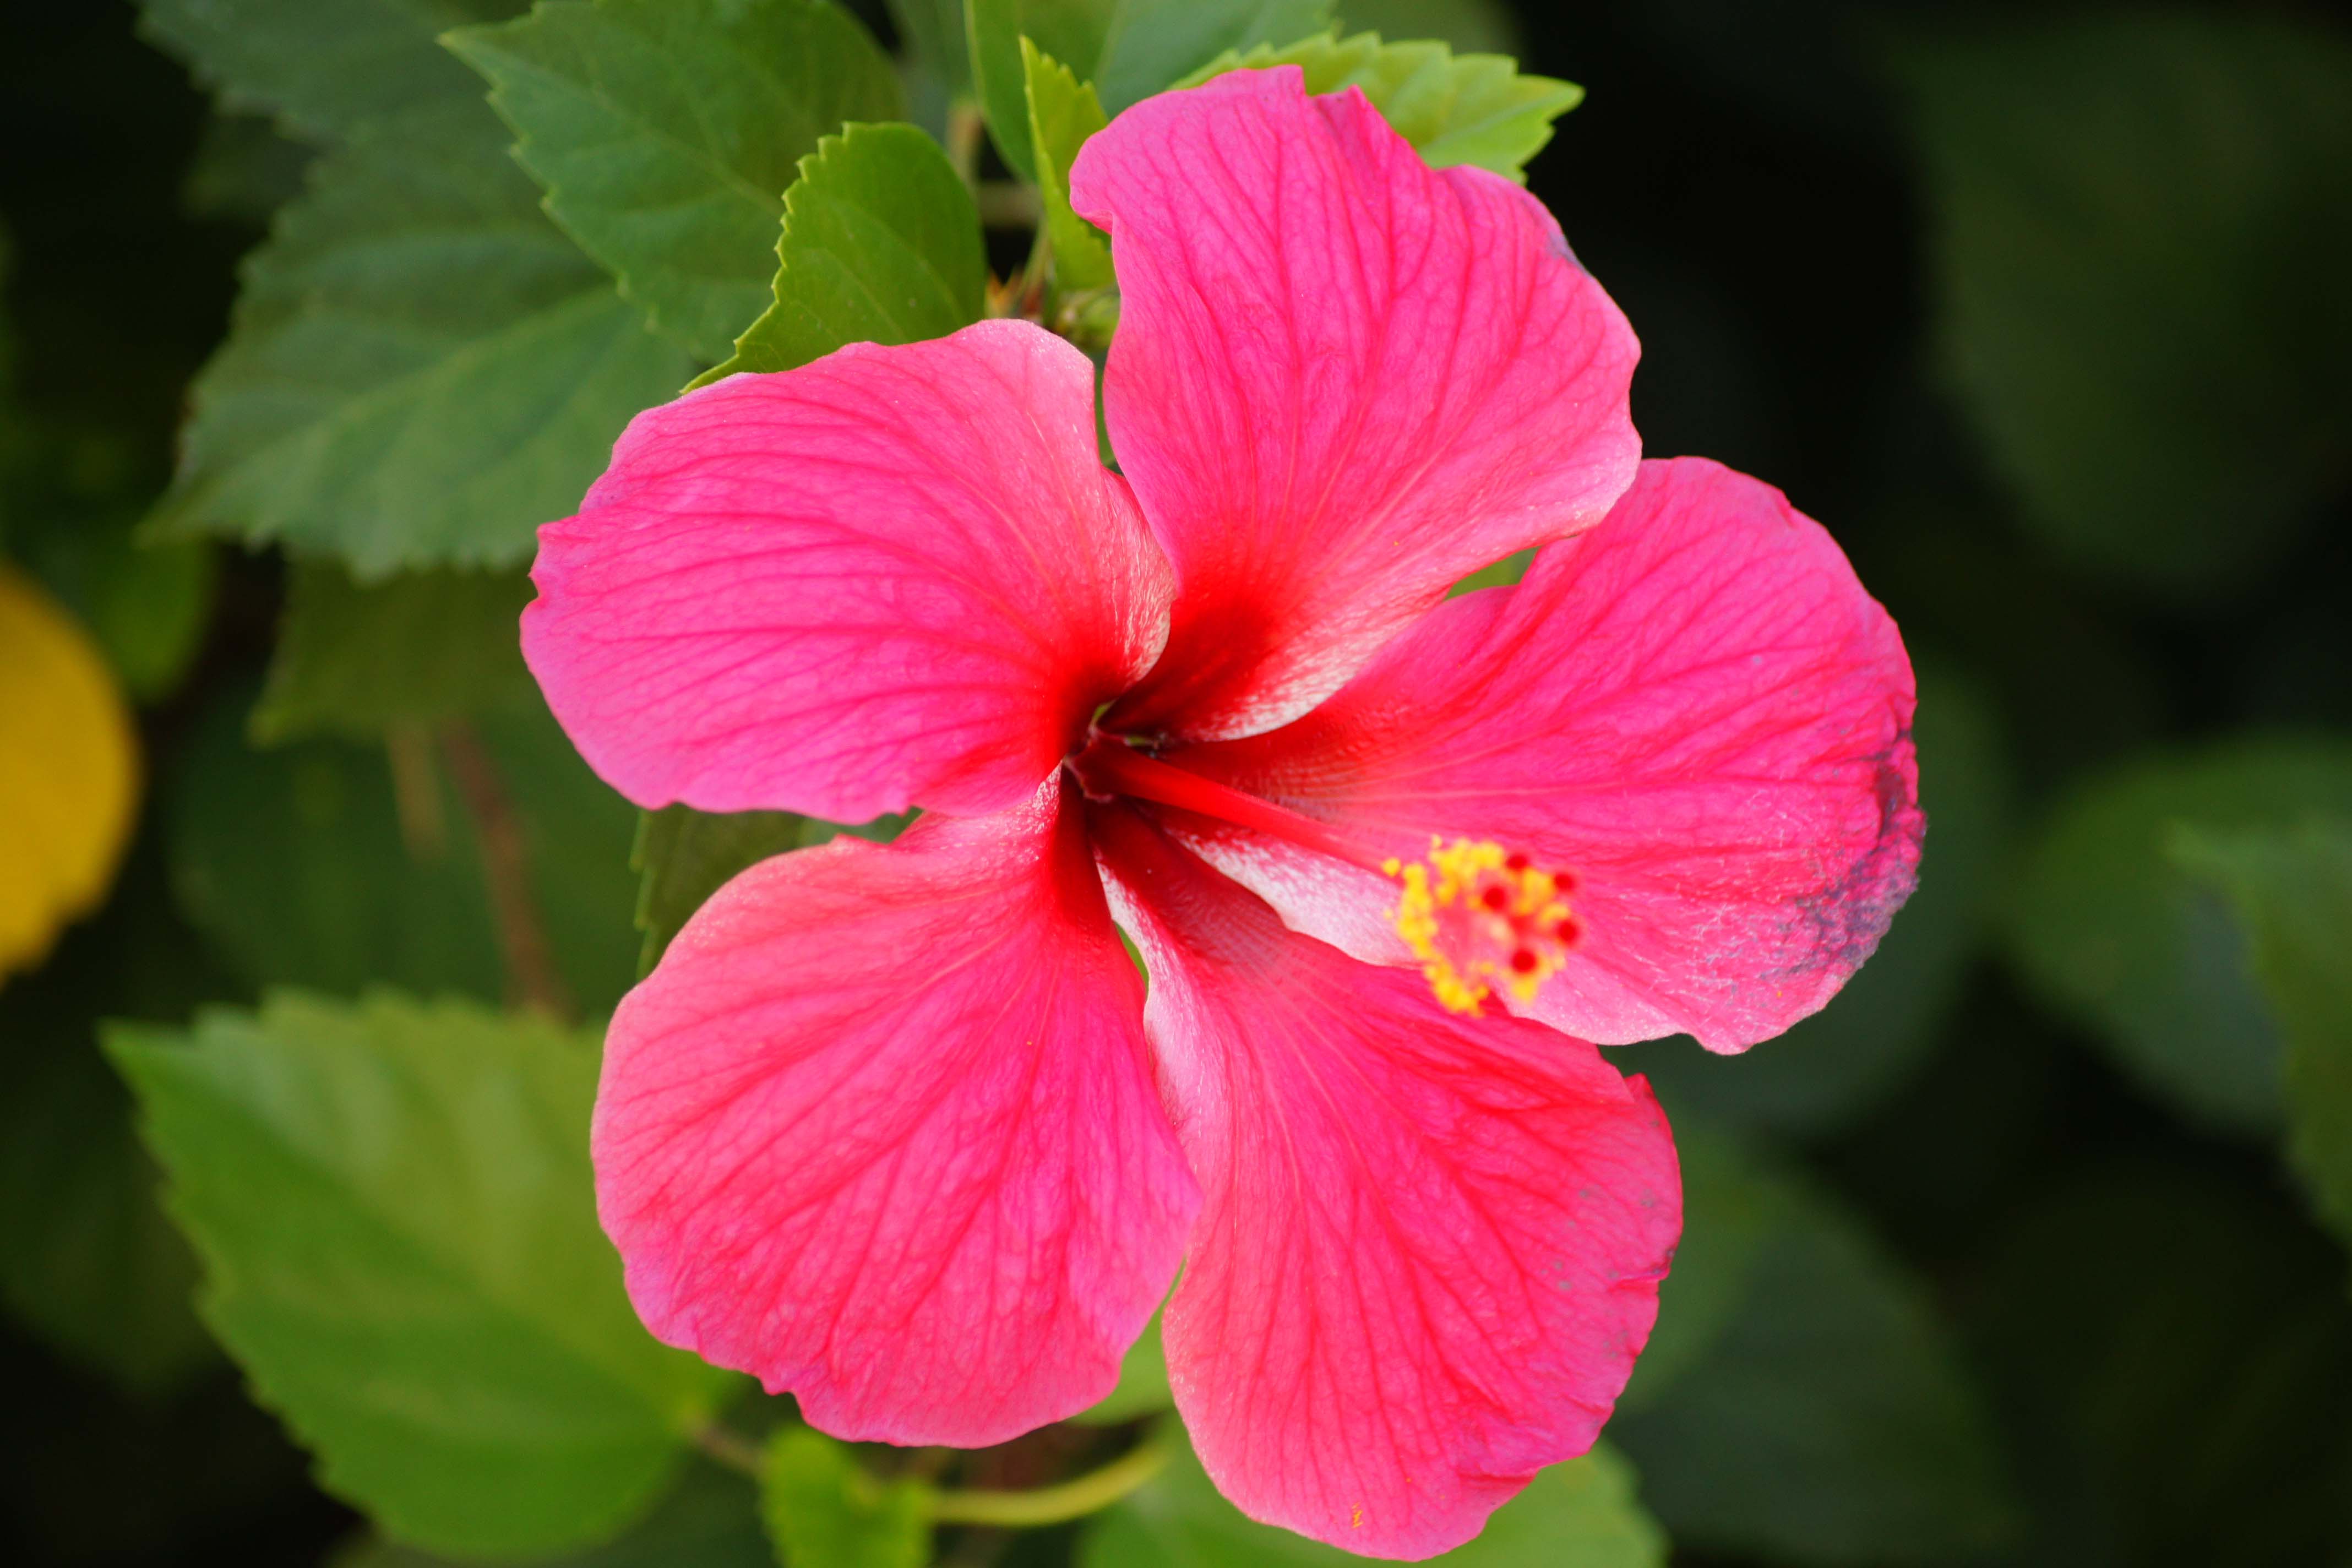 Earth Flower Hibiscus Pink Flower 4272x2848